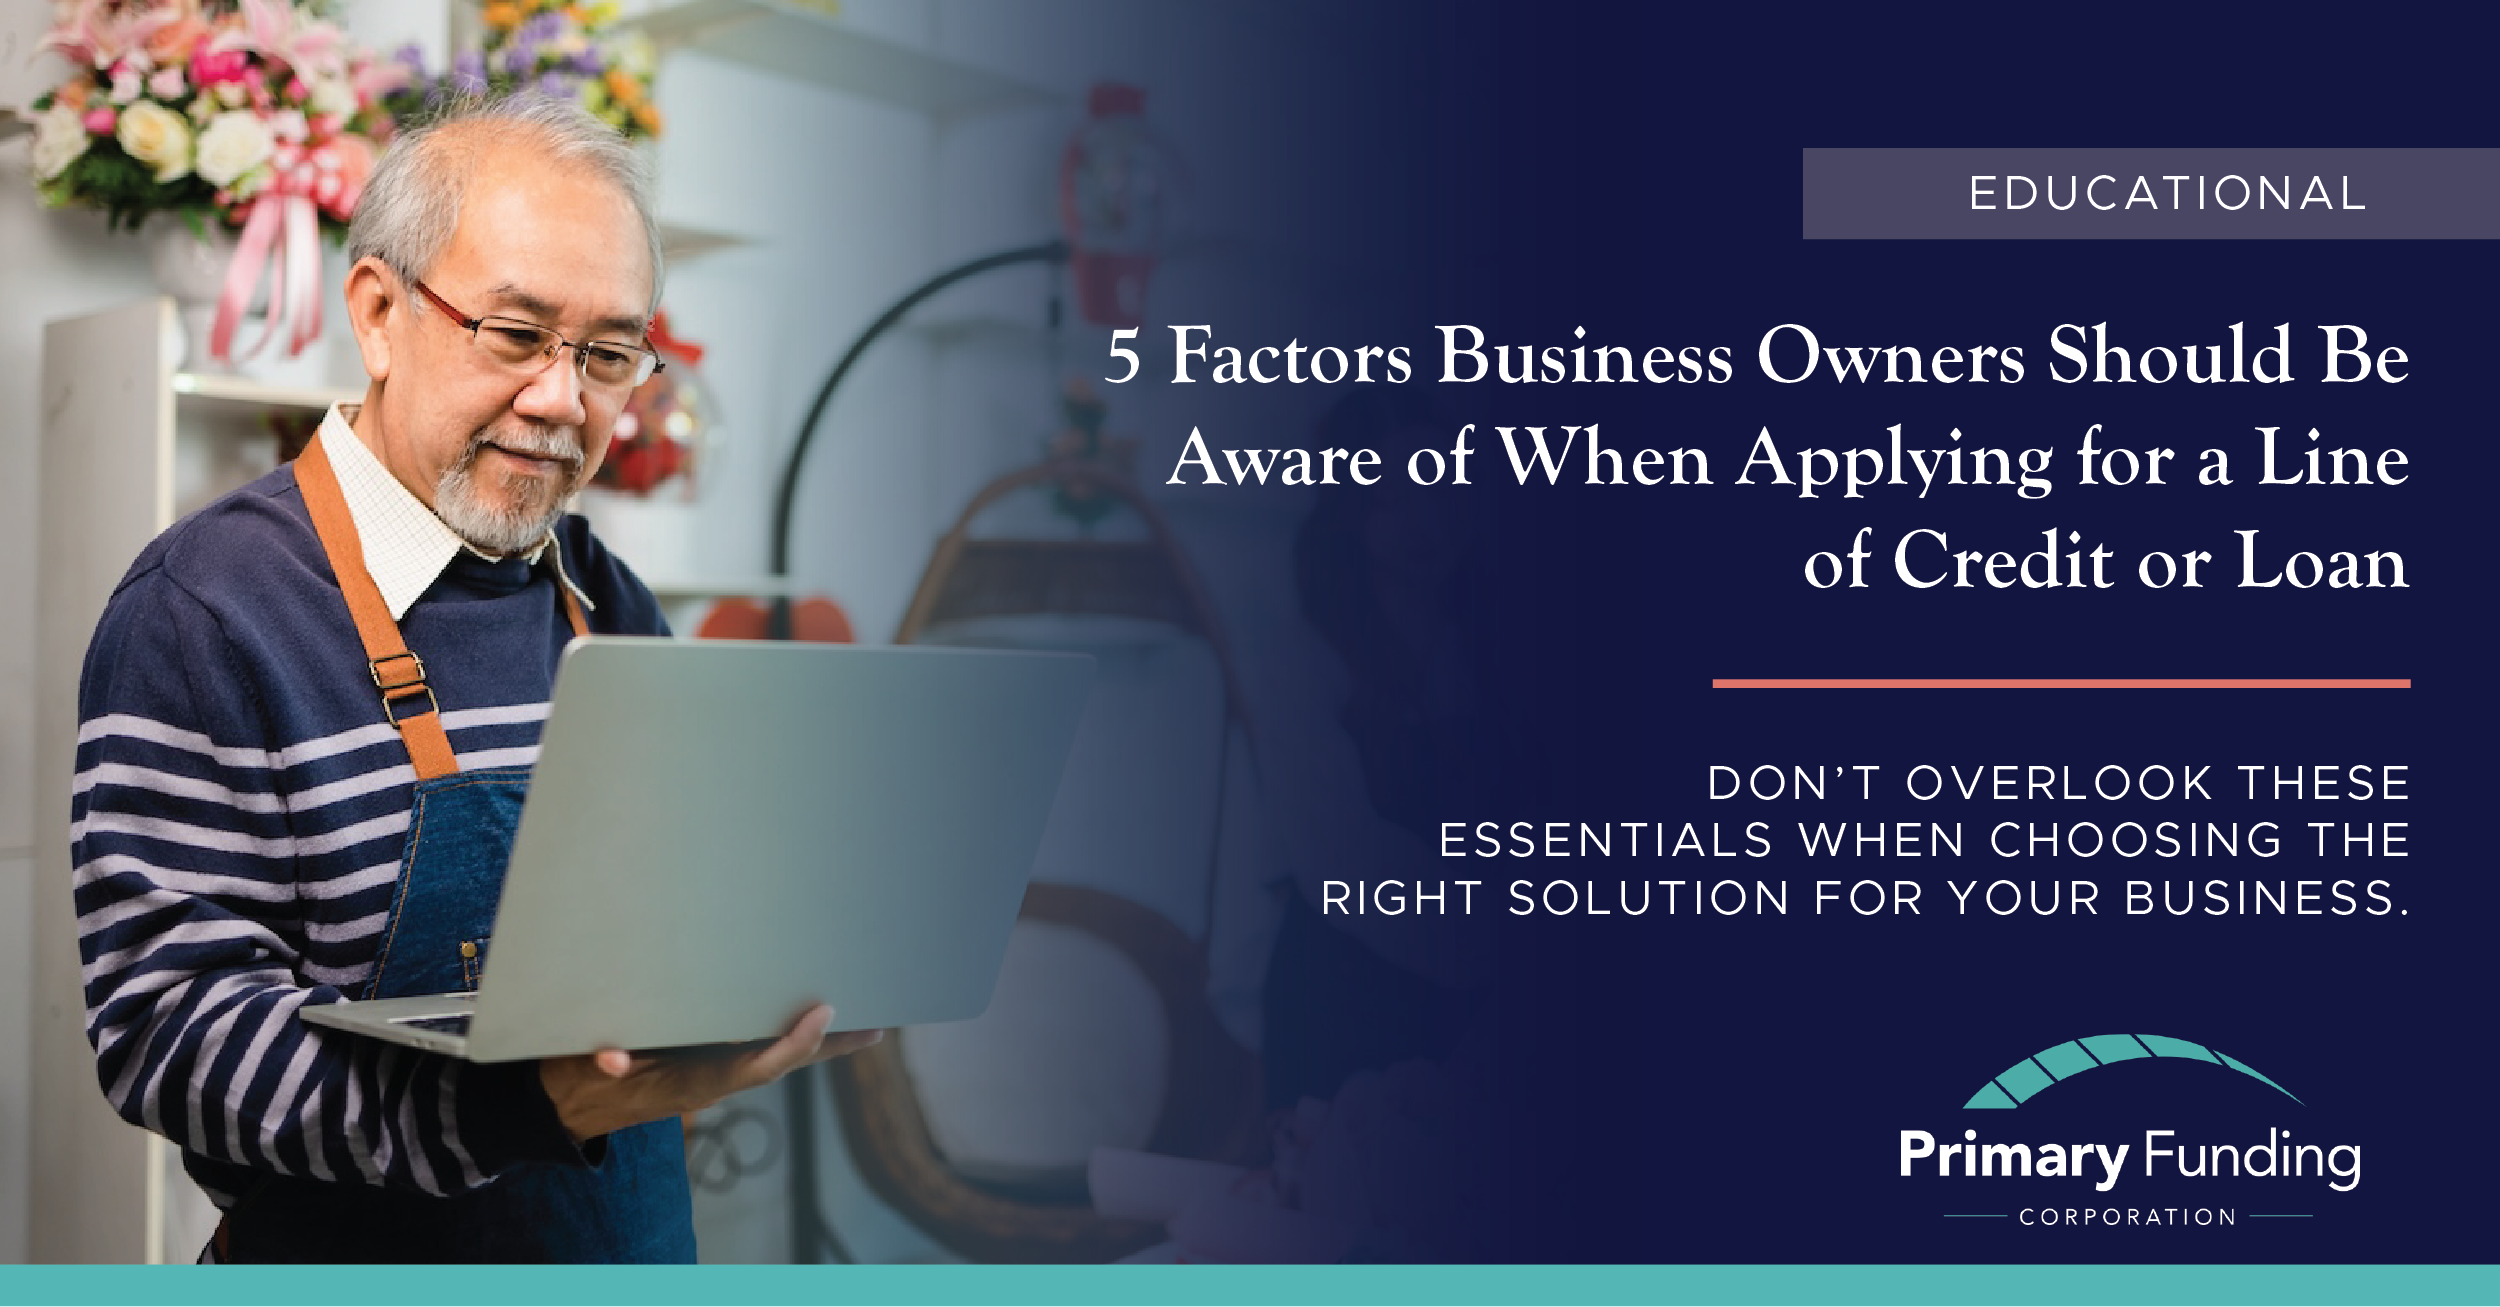 08 Top 5 Things Business Owners Should Be Aware Of When Applying For Business Loans